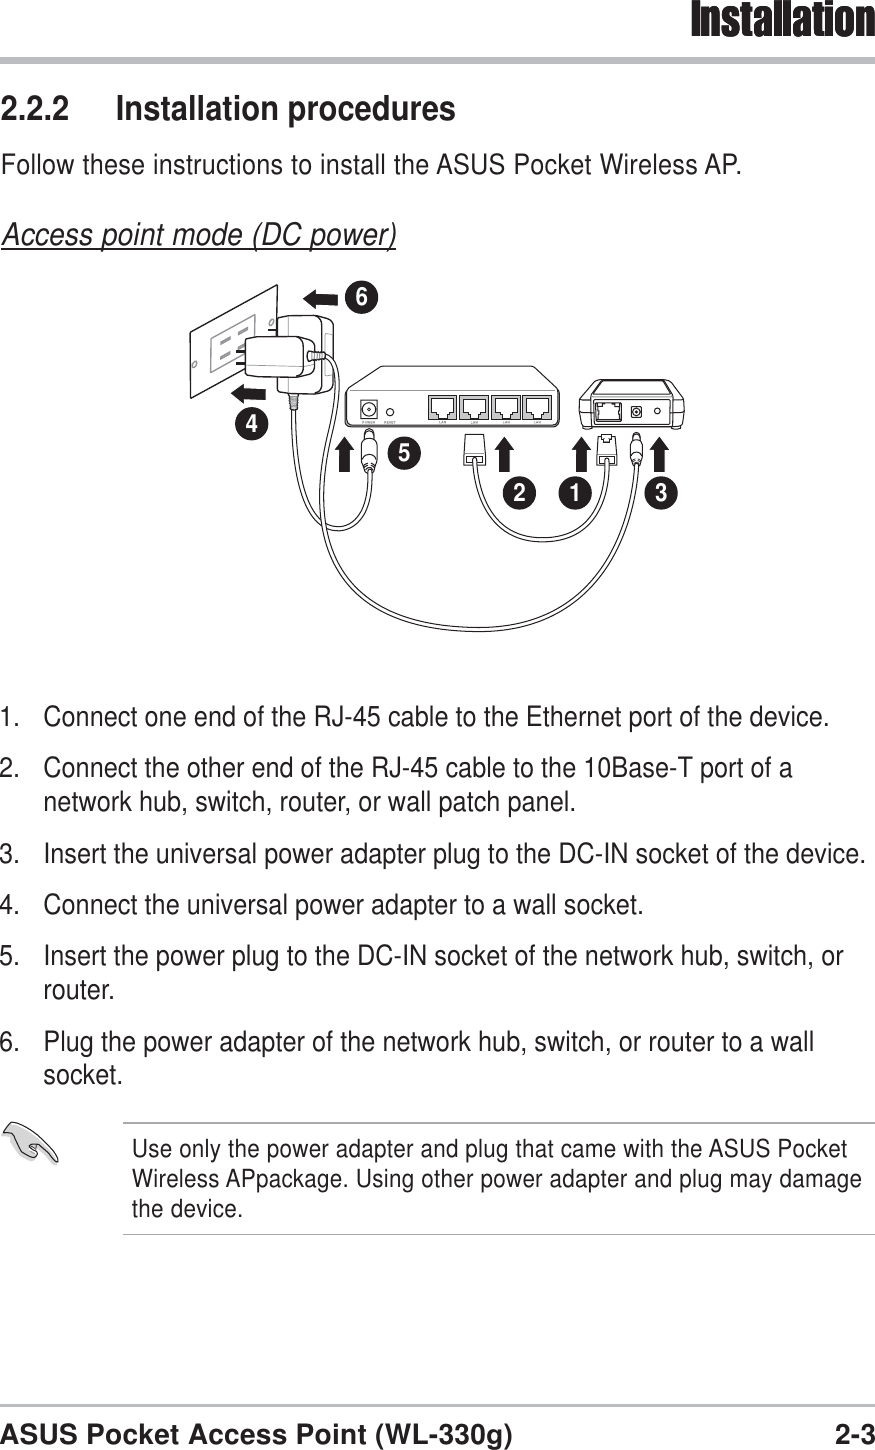 2-3ASUS Pocket Access Point (WL-330g)Installation1. Connect one end of the RJ-45 cable to the Ethernet port of the device.2. Connect the other end of the RJ-45 cable to the 10Base-T port of anetwork hub, switch, router, or wall patch panel.3. Insert the universal power adapter plug to the DC-IN socket of the device.4. Connect the universal power adapter to a wall socket.5. Insert the power plug to the DC-IN socket of the network hub, switch, orrouter.6. Plug the power adapter of the network hub, switch, or router to a wallsocket.2 1 34562.2.2 Installation proceduresFollow these instructions to install the ASUS Pocket Wireless AP.Access point mode (DC power)InstallationUse only the power adapter and plug that came with the ASUS PocketWireless APpackage. Using other power adapter and plug may damagethe device.